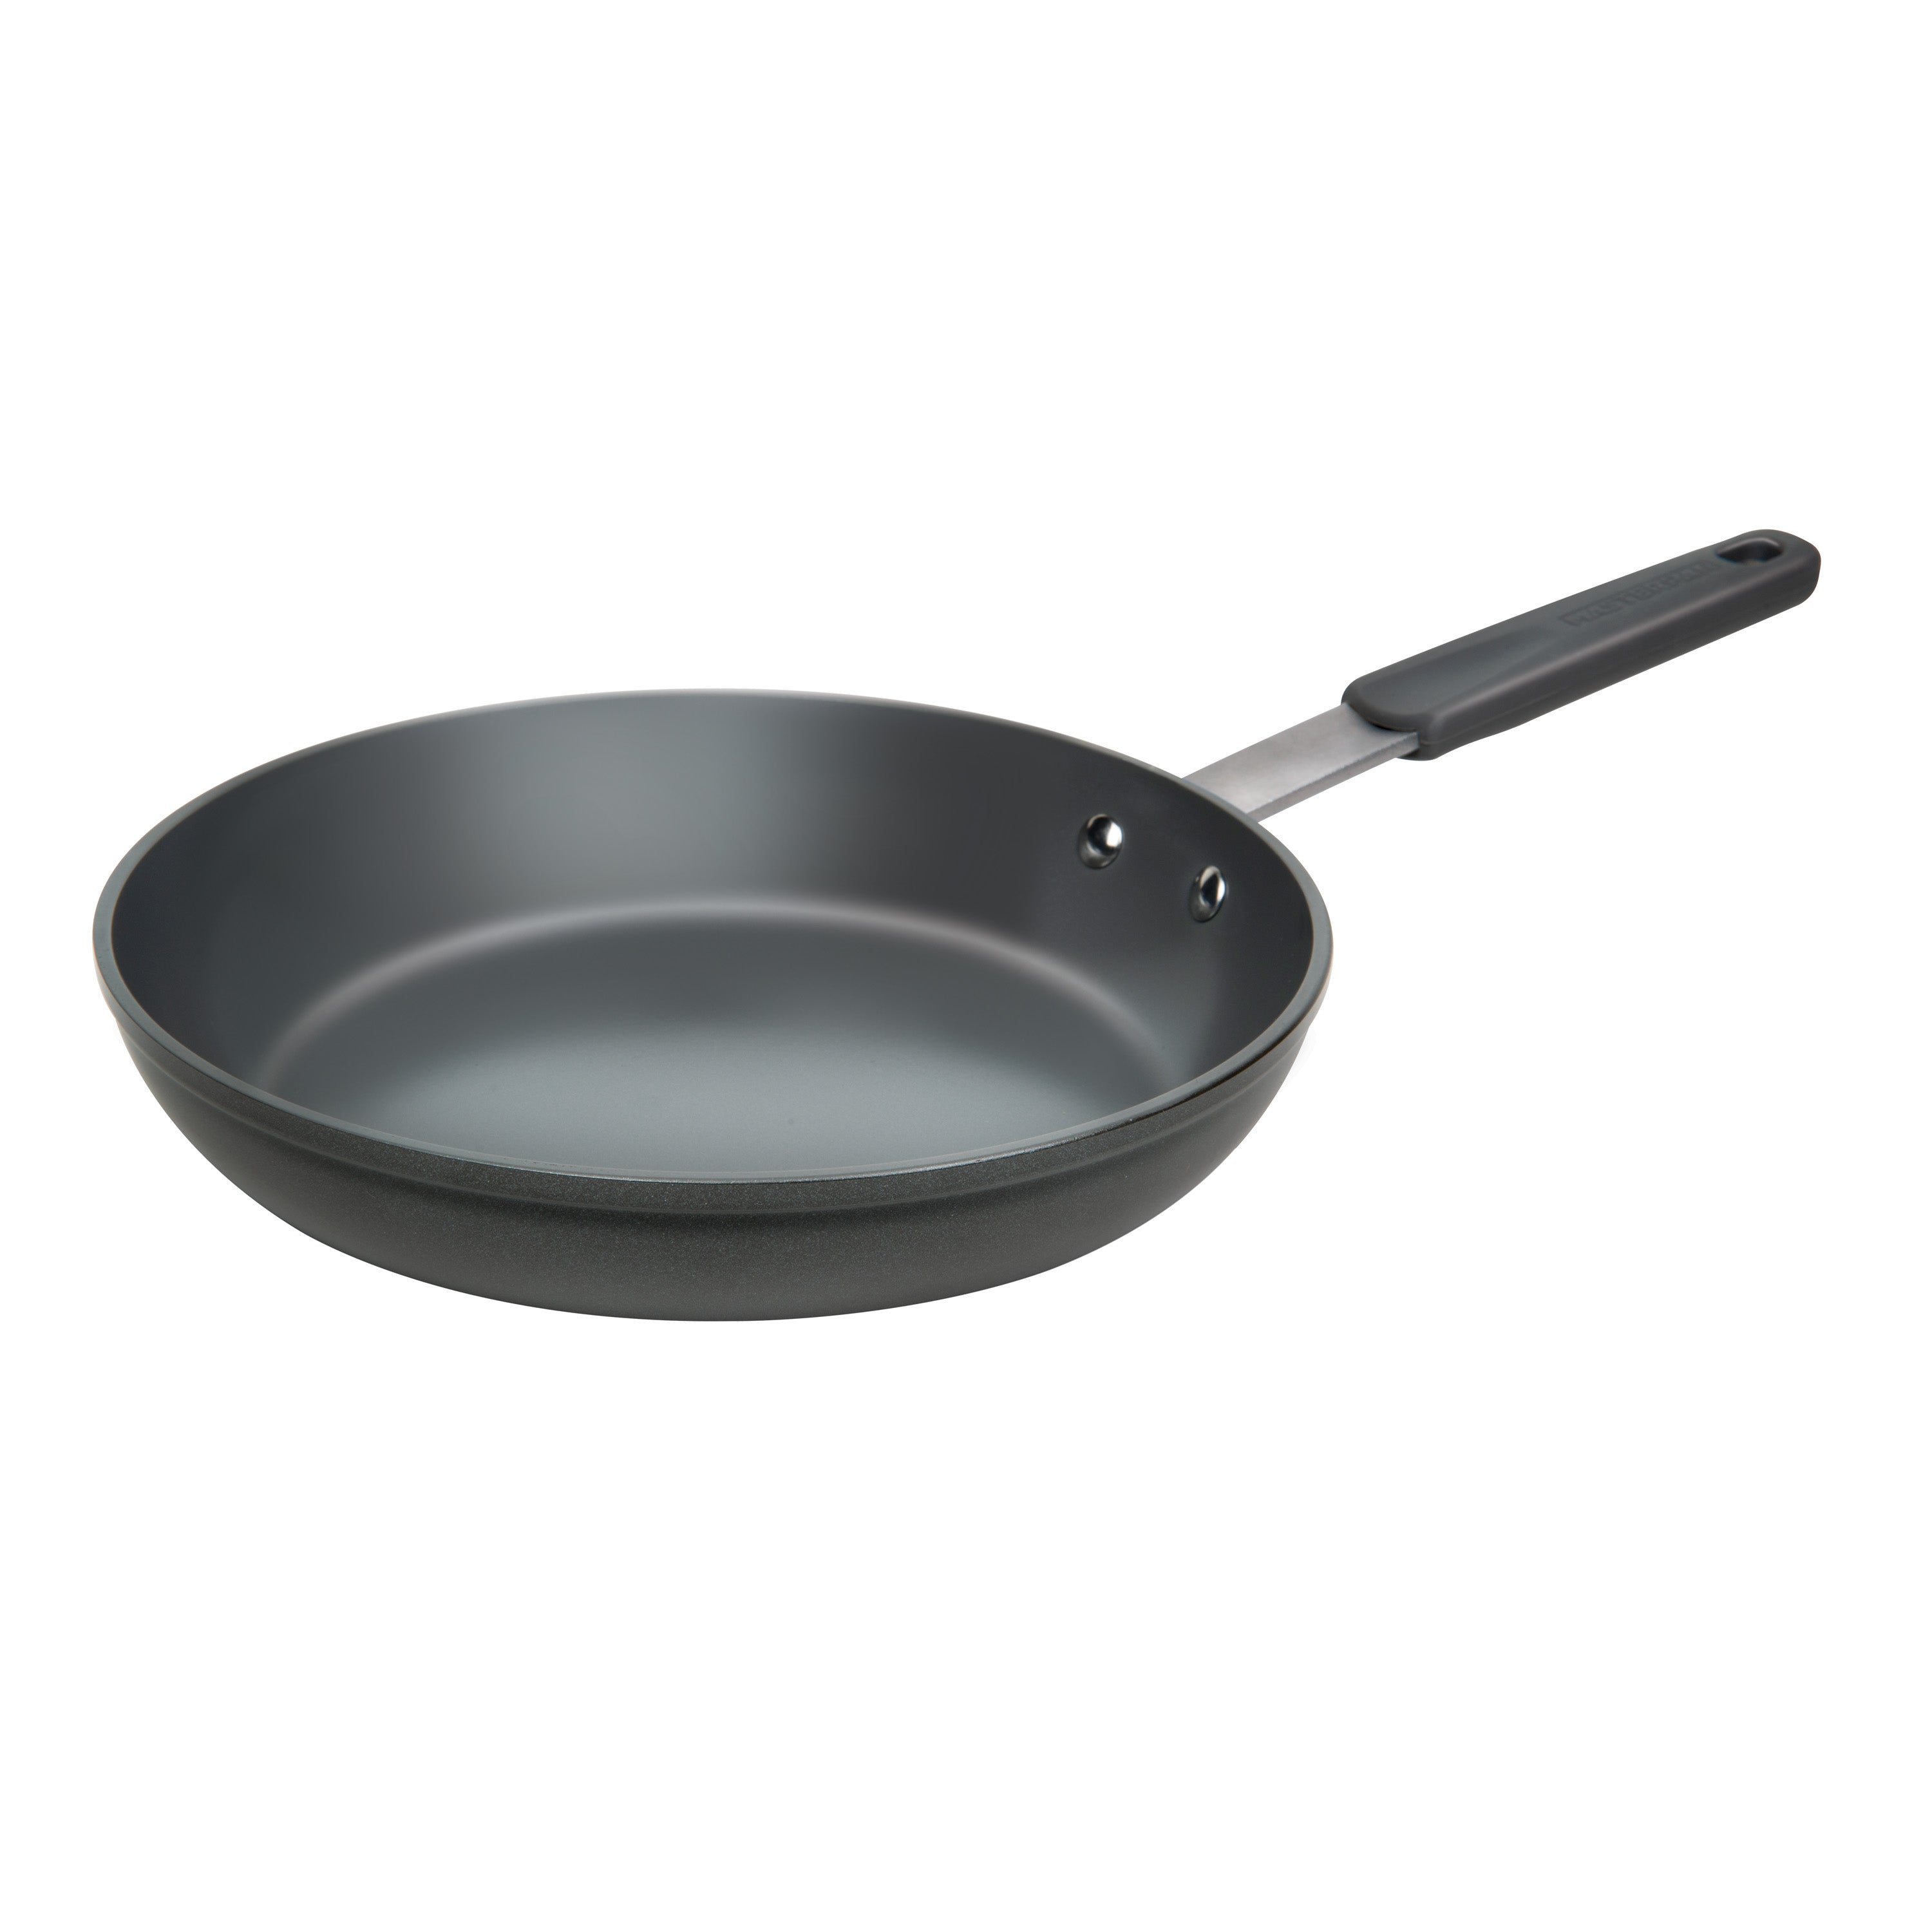 MASTERPAN Ceramic Nonstick Frypan & Skillet with Chef's Handle, 11